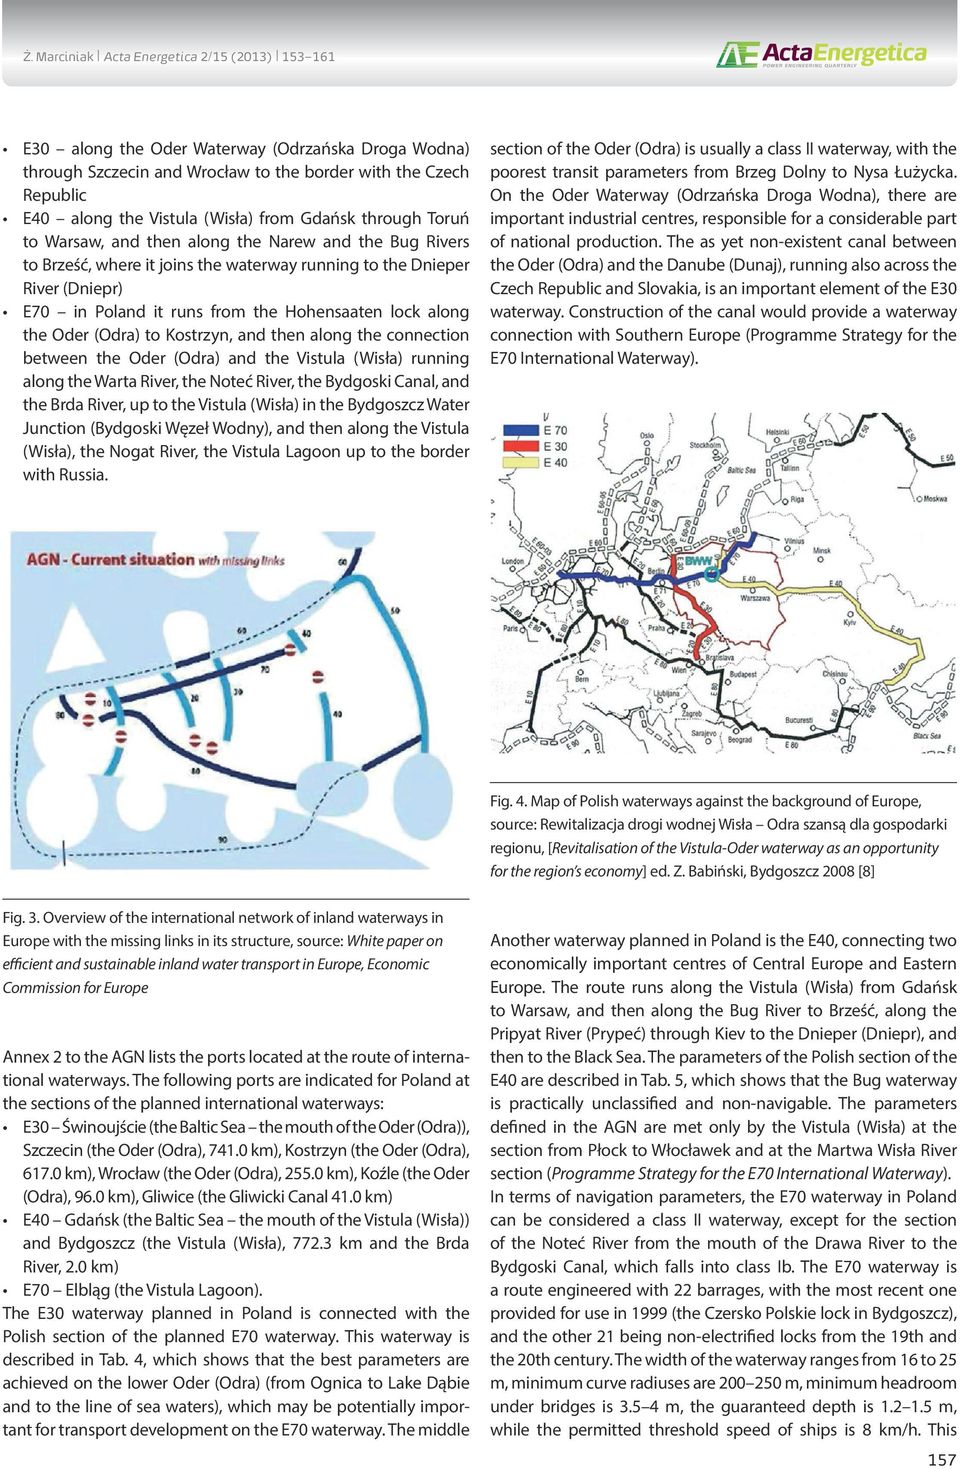 then along the connection between the Oder (Odra) and the Vistula (Wisła) running along the Warta River, the Noteć River, the Bydgoski Canal, and the Brda River, up to the Vistula (Wisła) in the